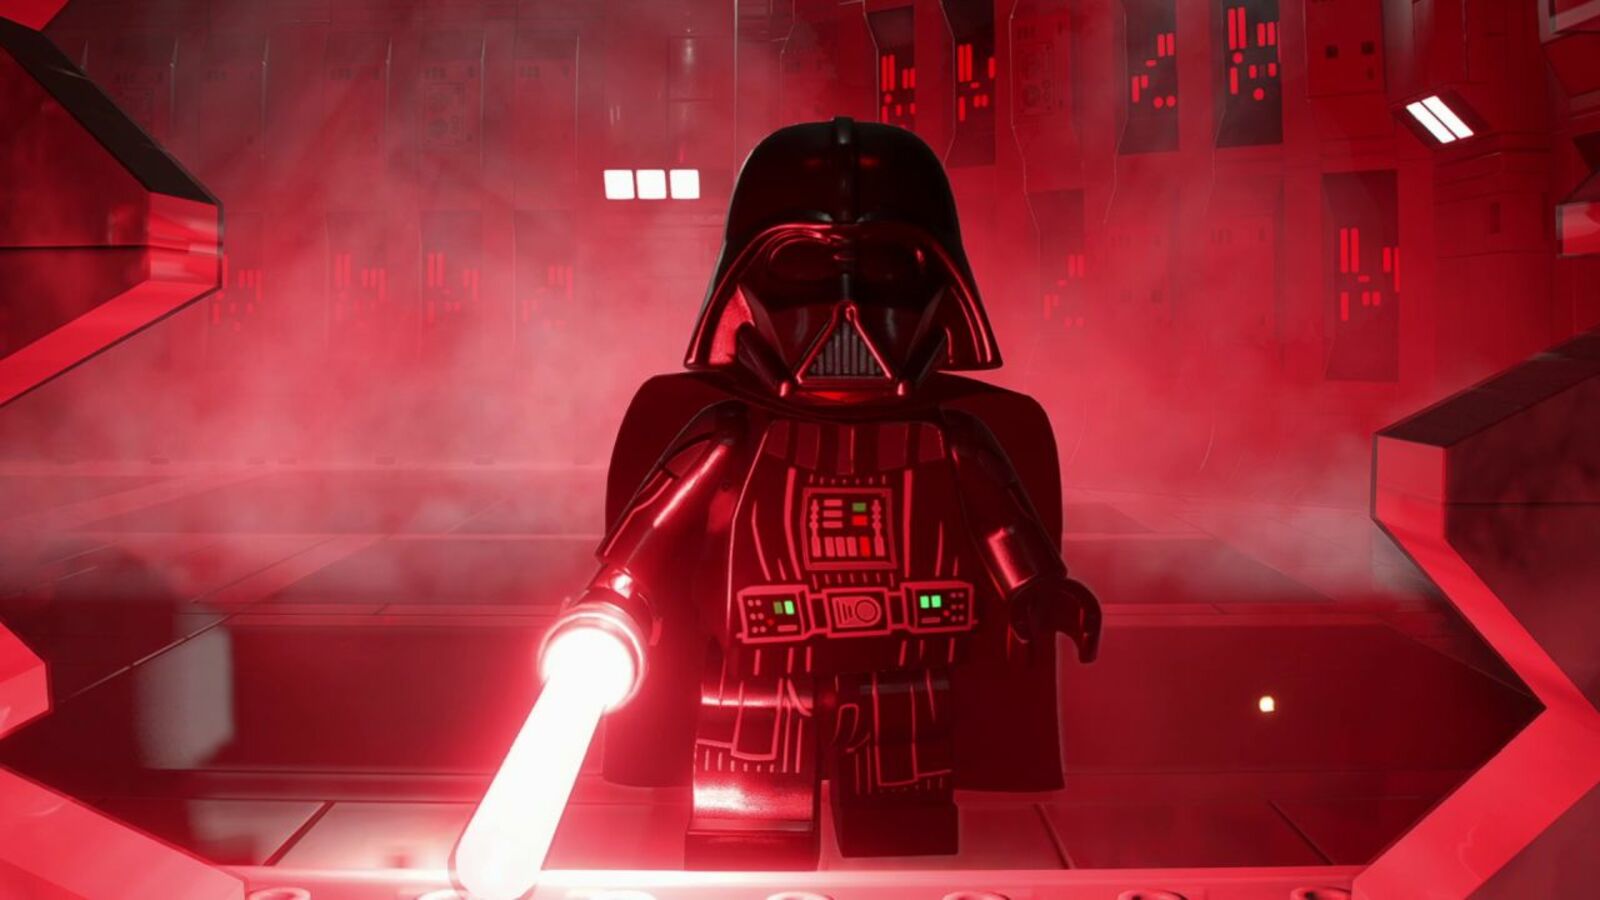 Lego Star Wars: The Skywalker Saga is full of delight and discovery, but also it's a shooter now. Rock Paper Shotgun